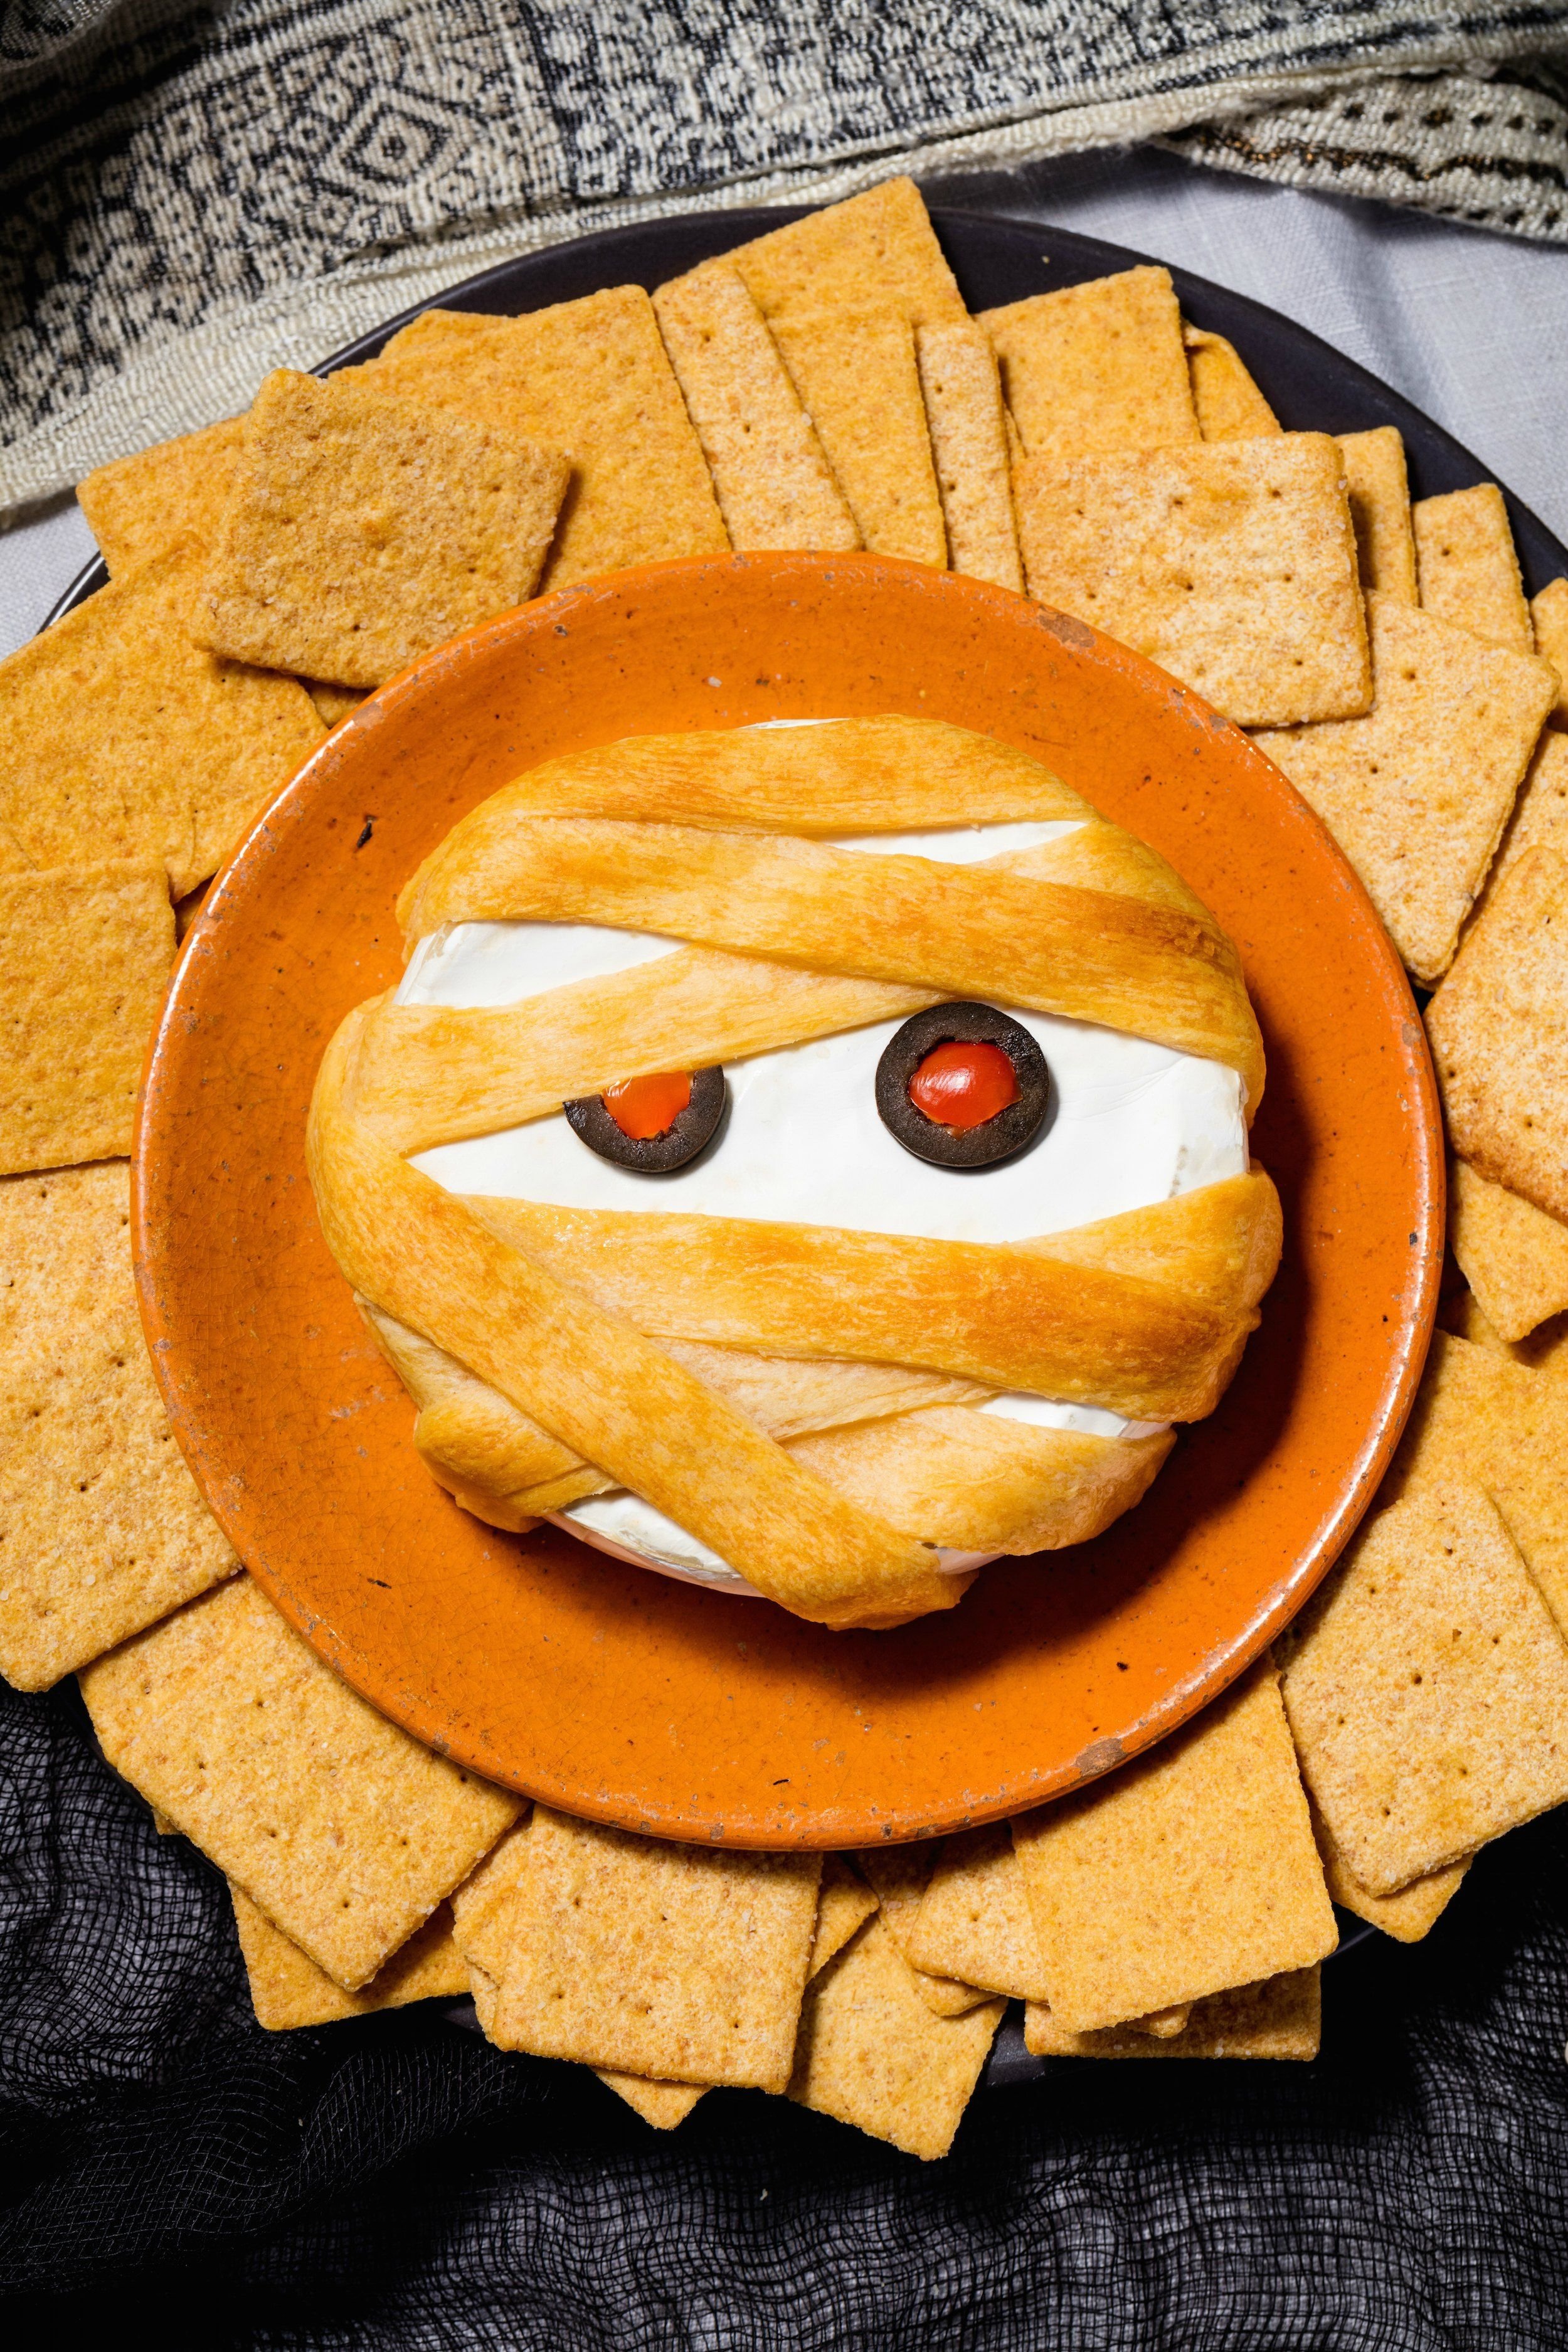 10 Unique Halloween Food Ideas For Adults Easy 19 easy halloween recipes gross and scary halloween food ideas 1 2022